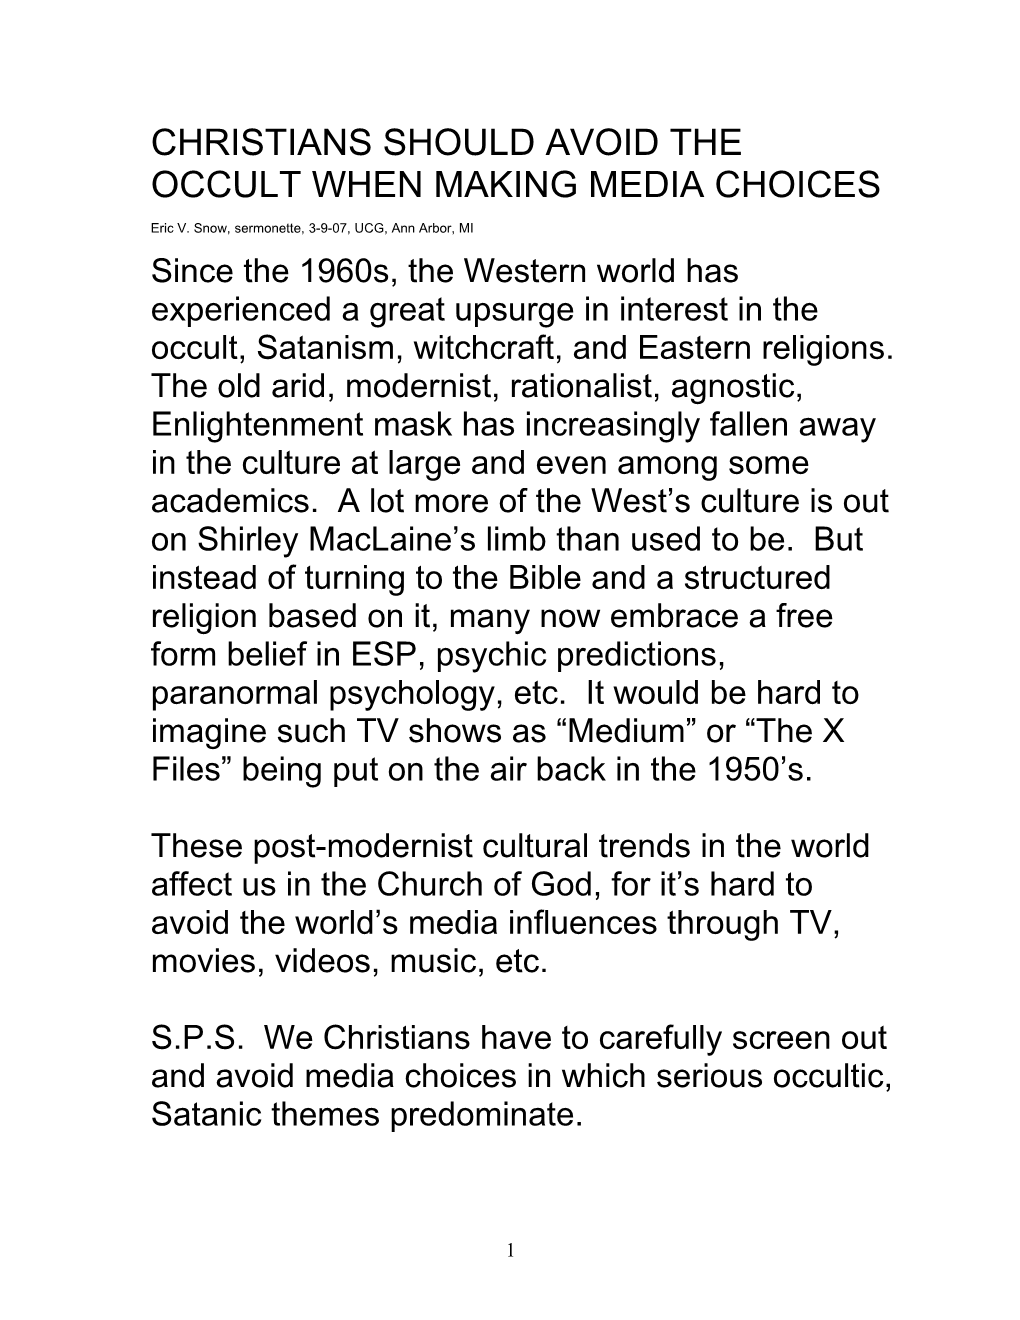 Christians Should Avoid the Occult When Making Media Choices